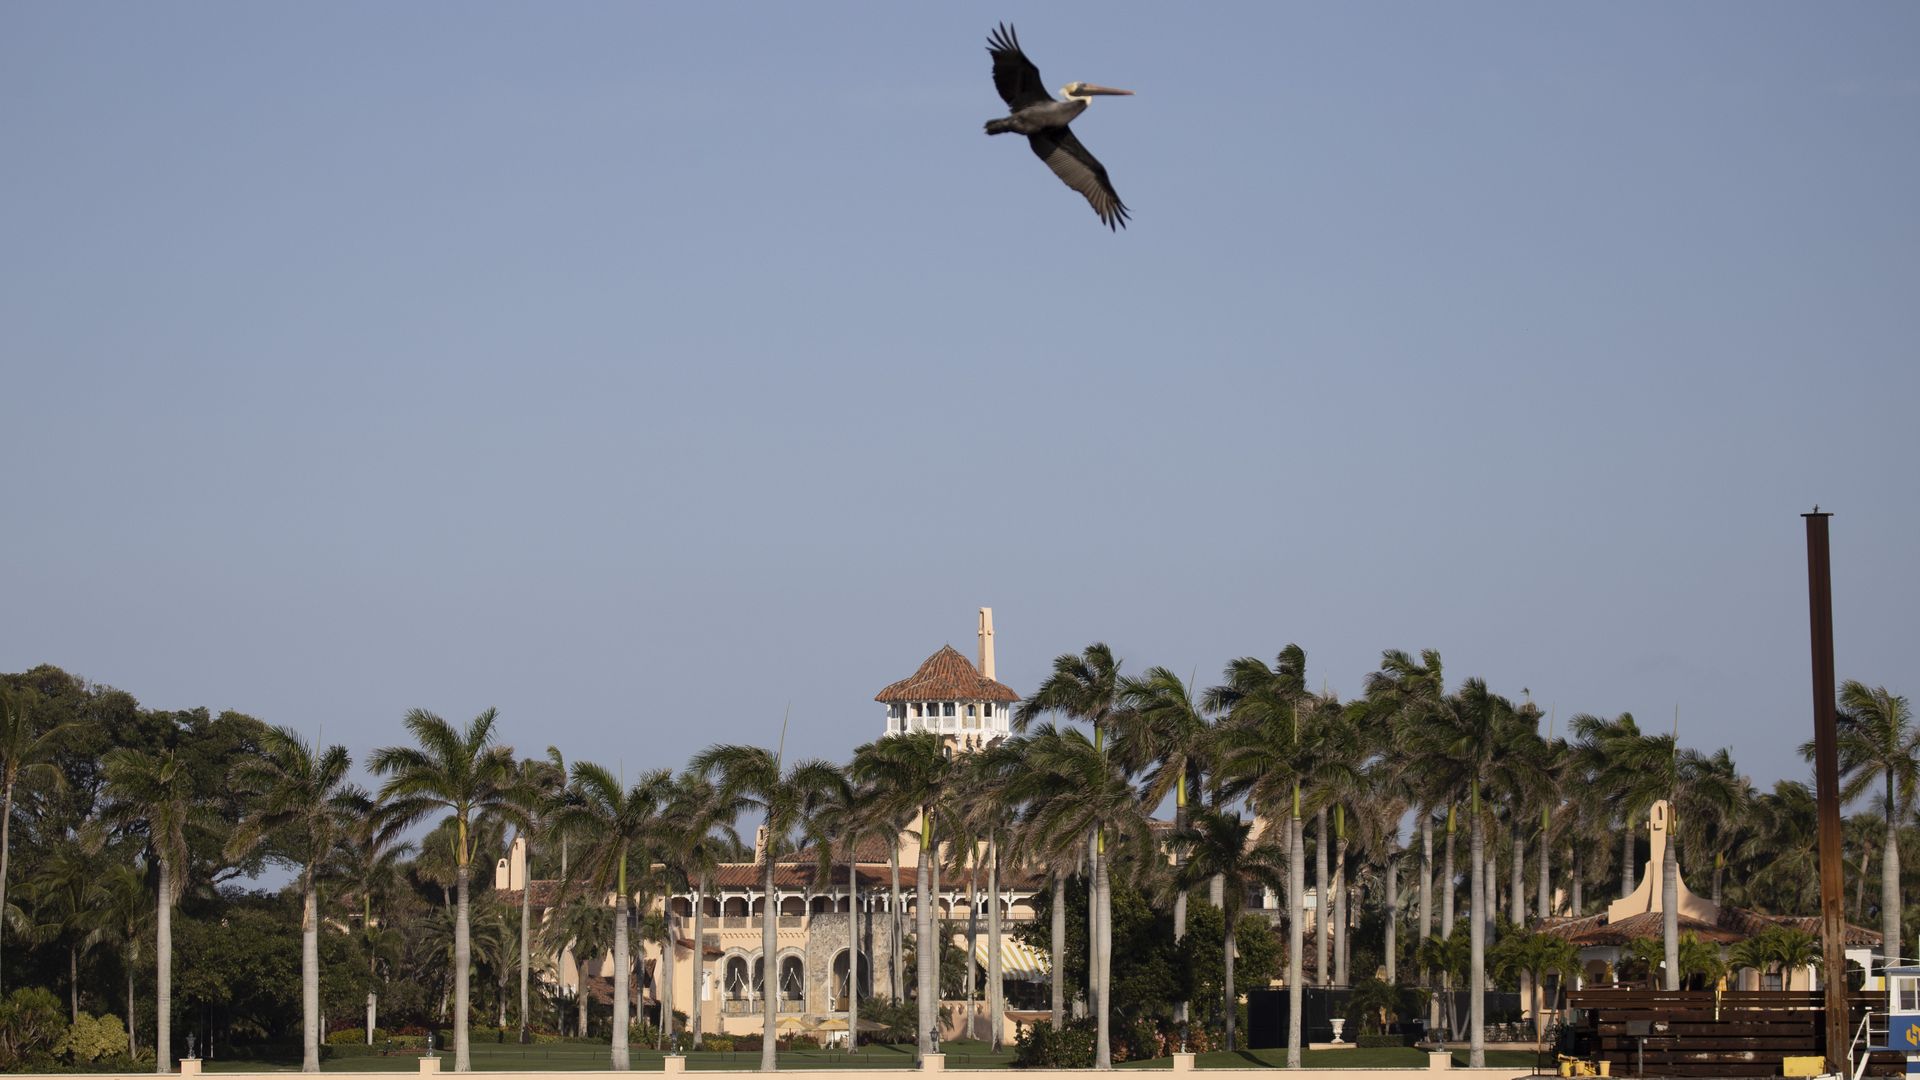  Former President Donald Trump's Mar-a-Lago resort where he resides after leaving the White House on February 13, 2021 in Palm Beach, Florida. 